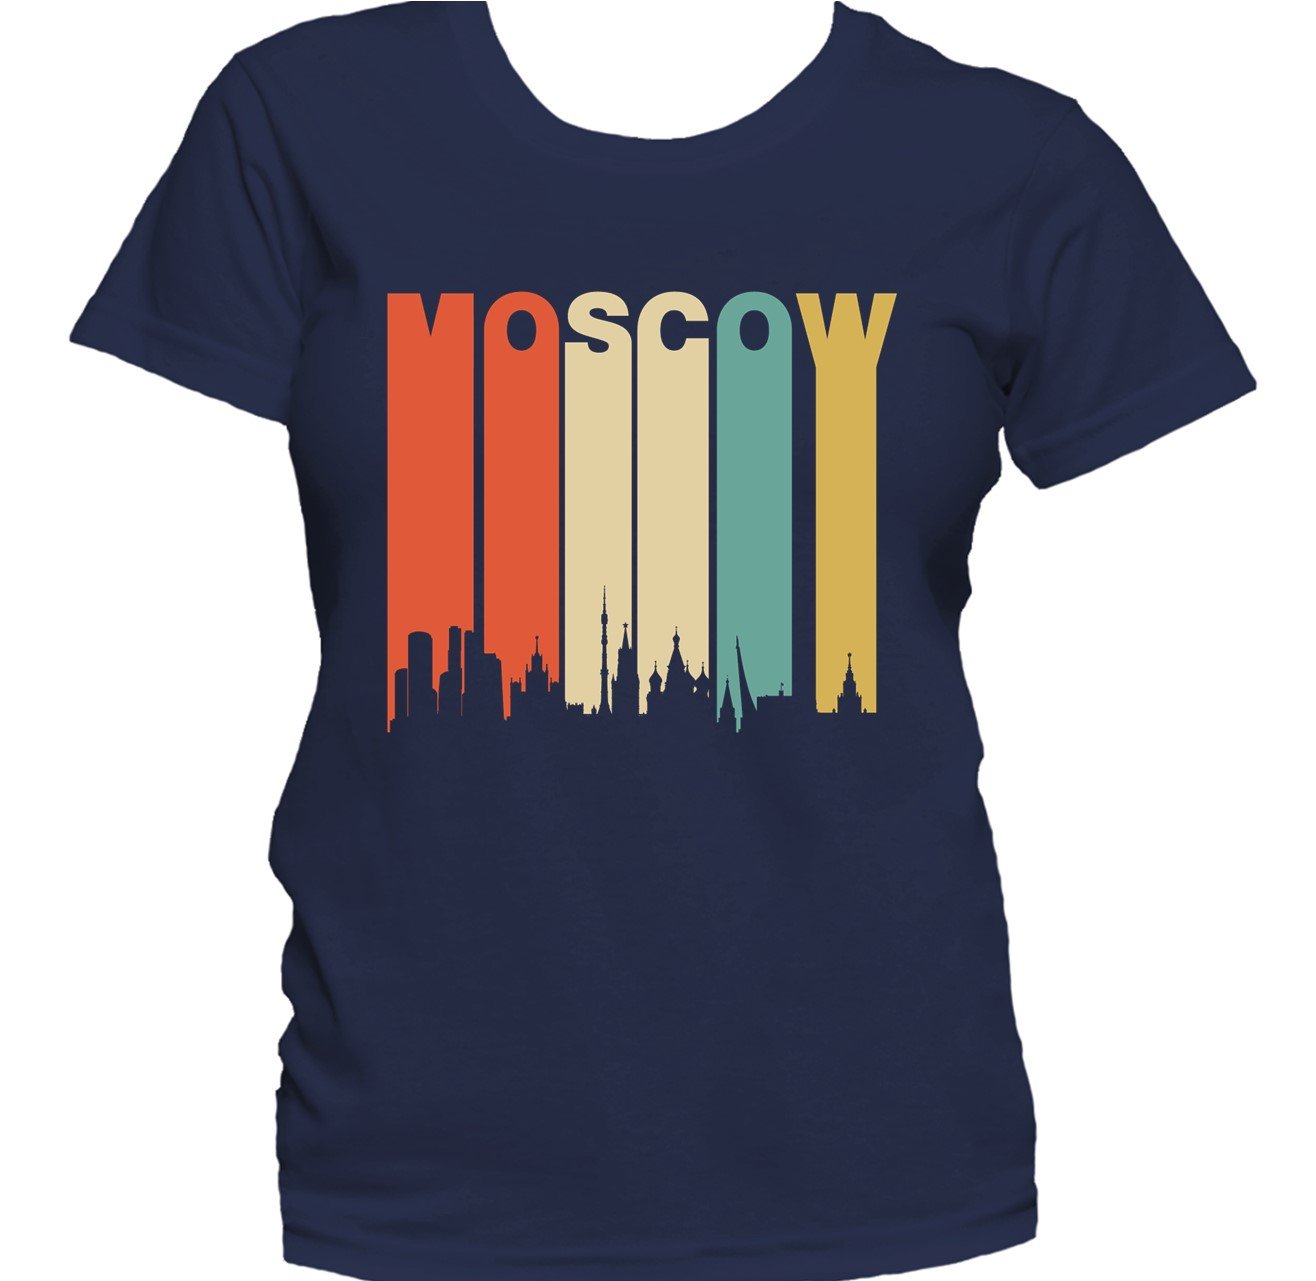 Retro 1970's Style Moscow Russia Cityscape Downtown Skyline Women's T-Shirt